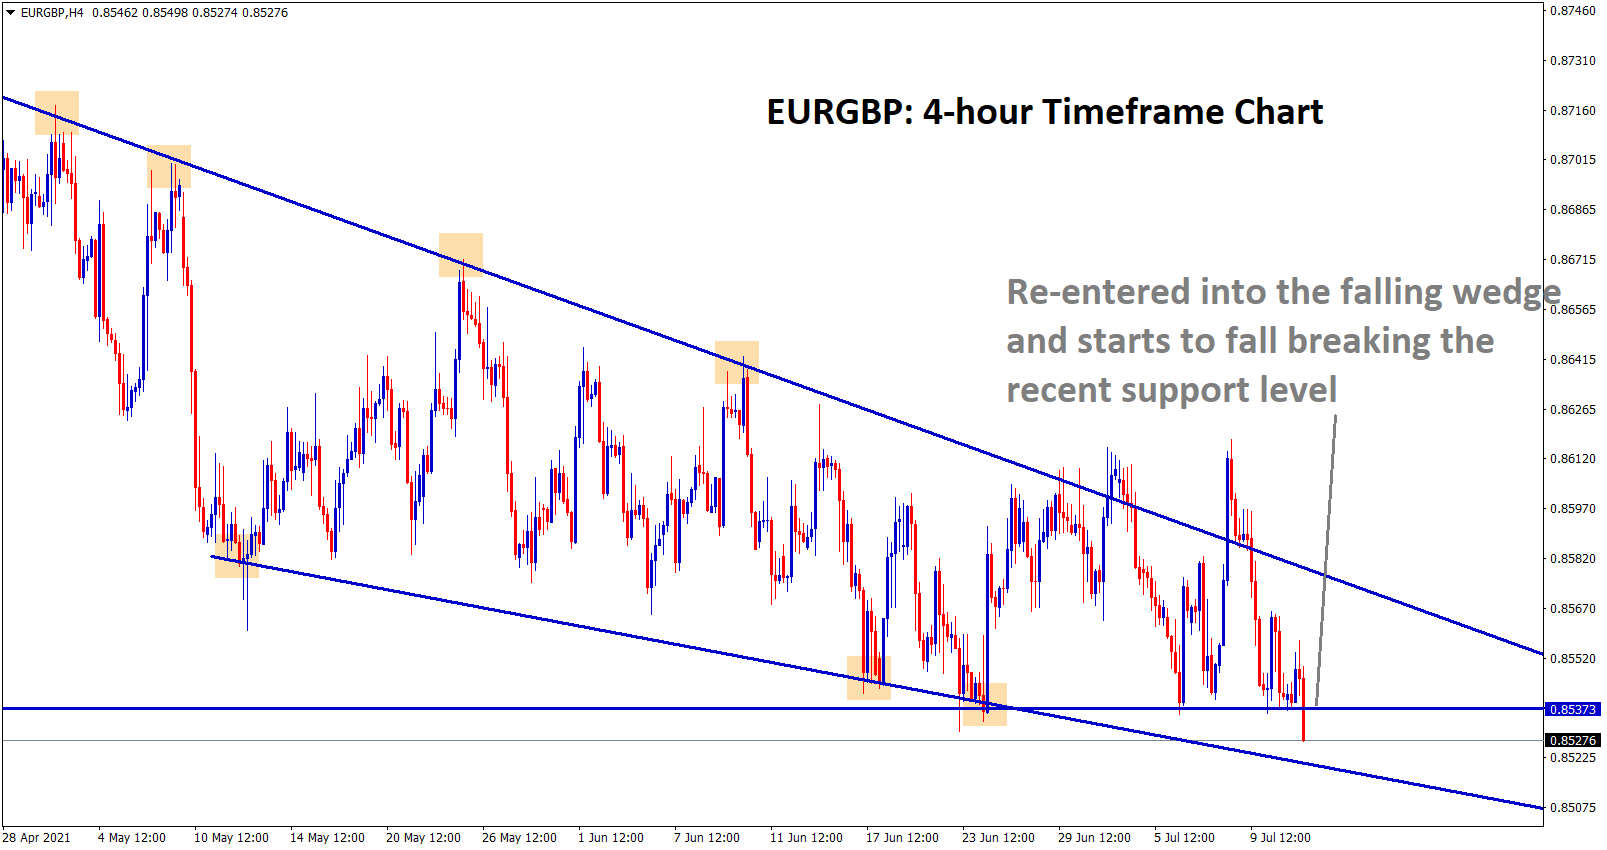 EURGBP fall back inside the falling wedge pattern and starts to break the support